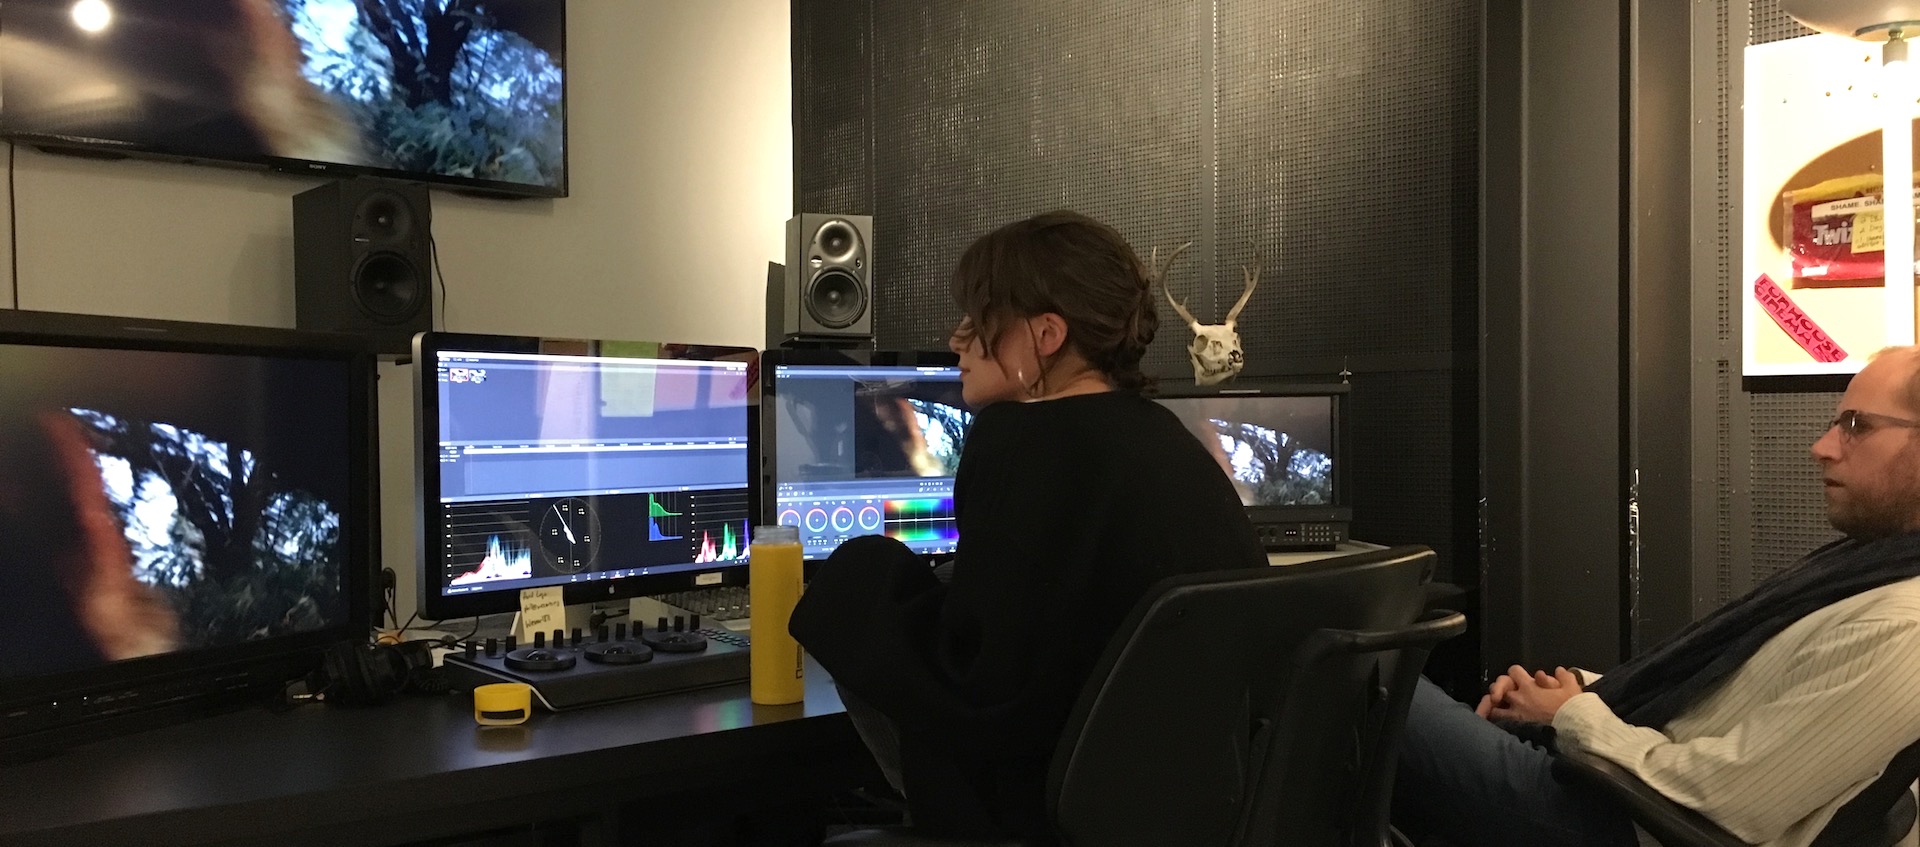 Filmmakers J.P. Sniadecki & Lisa Malloy complete post-production work on The Shape of Things to Come in the Wexner Center Film/Video Studio 